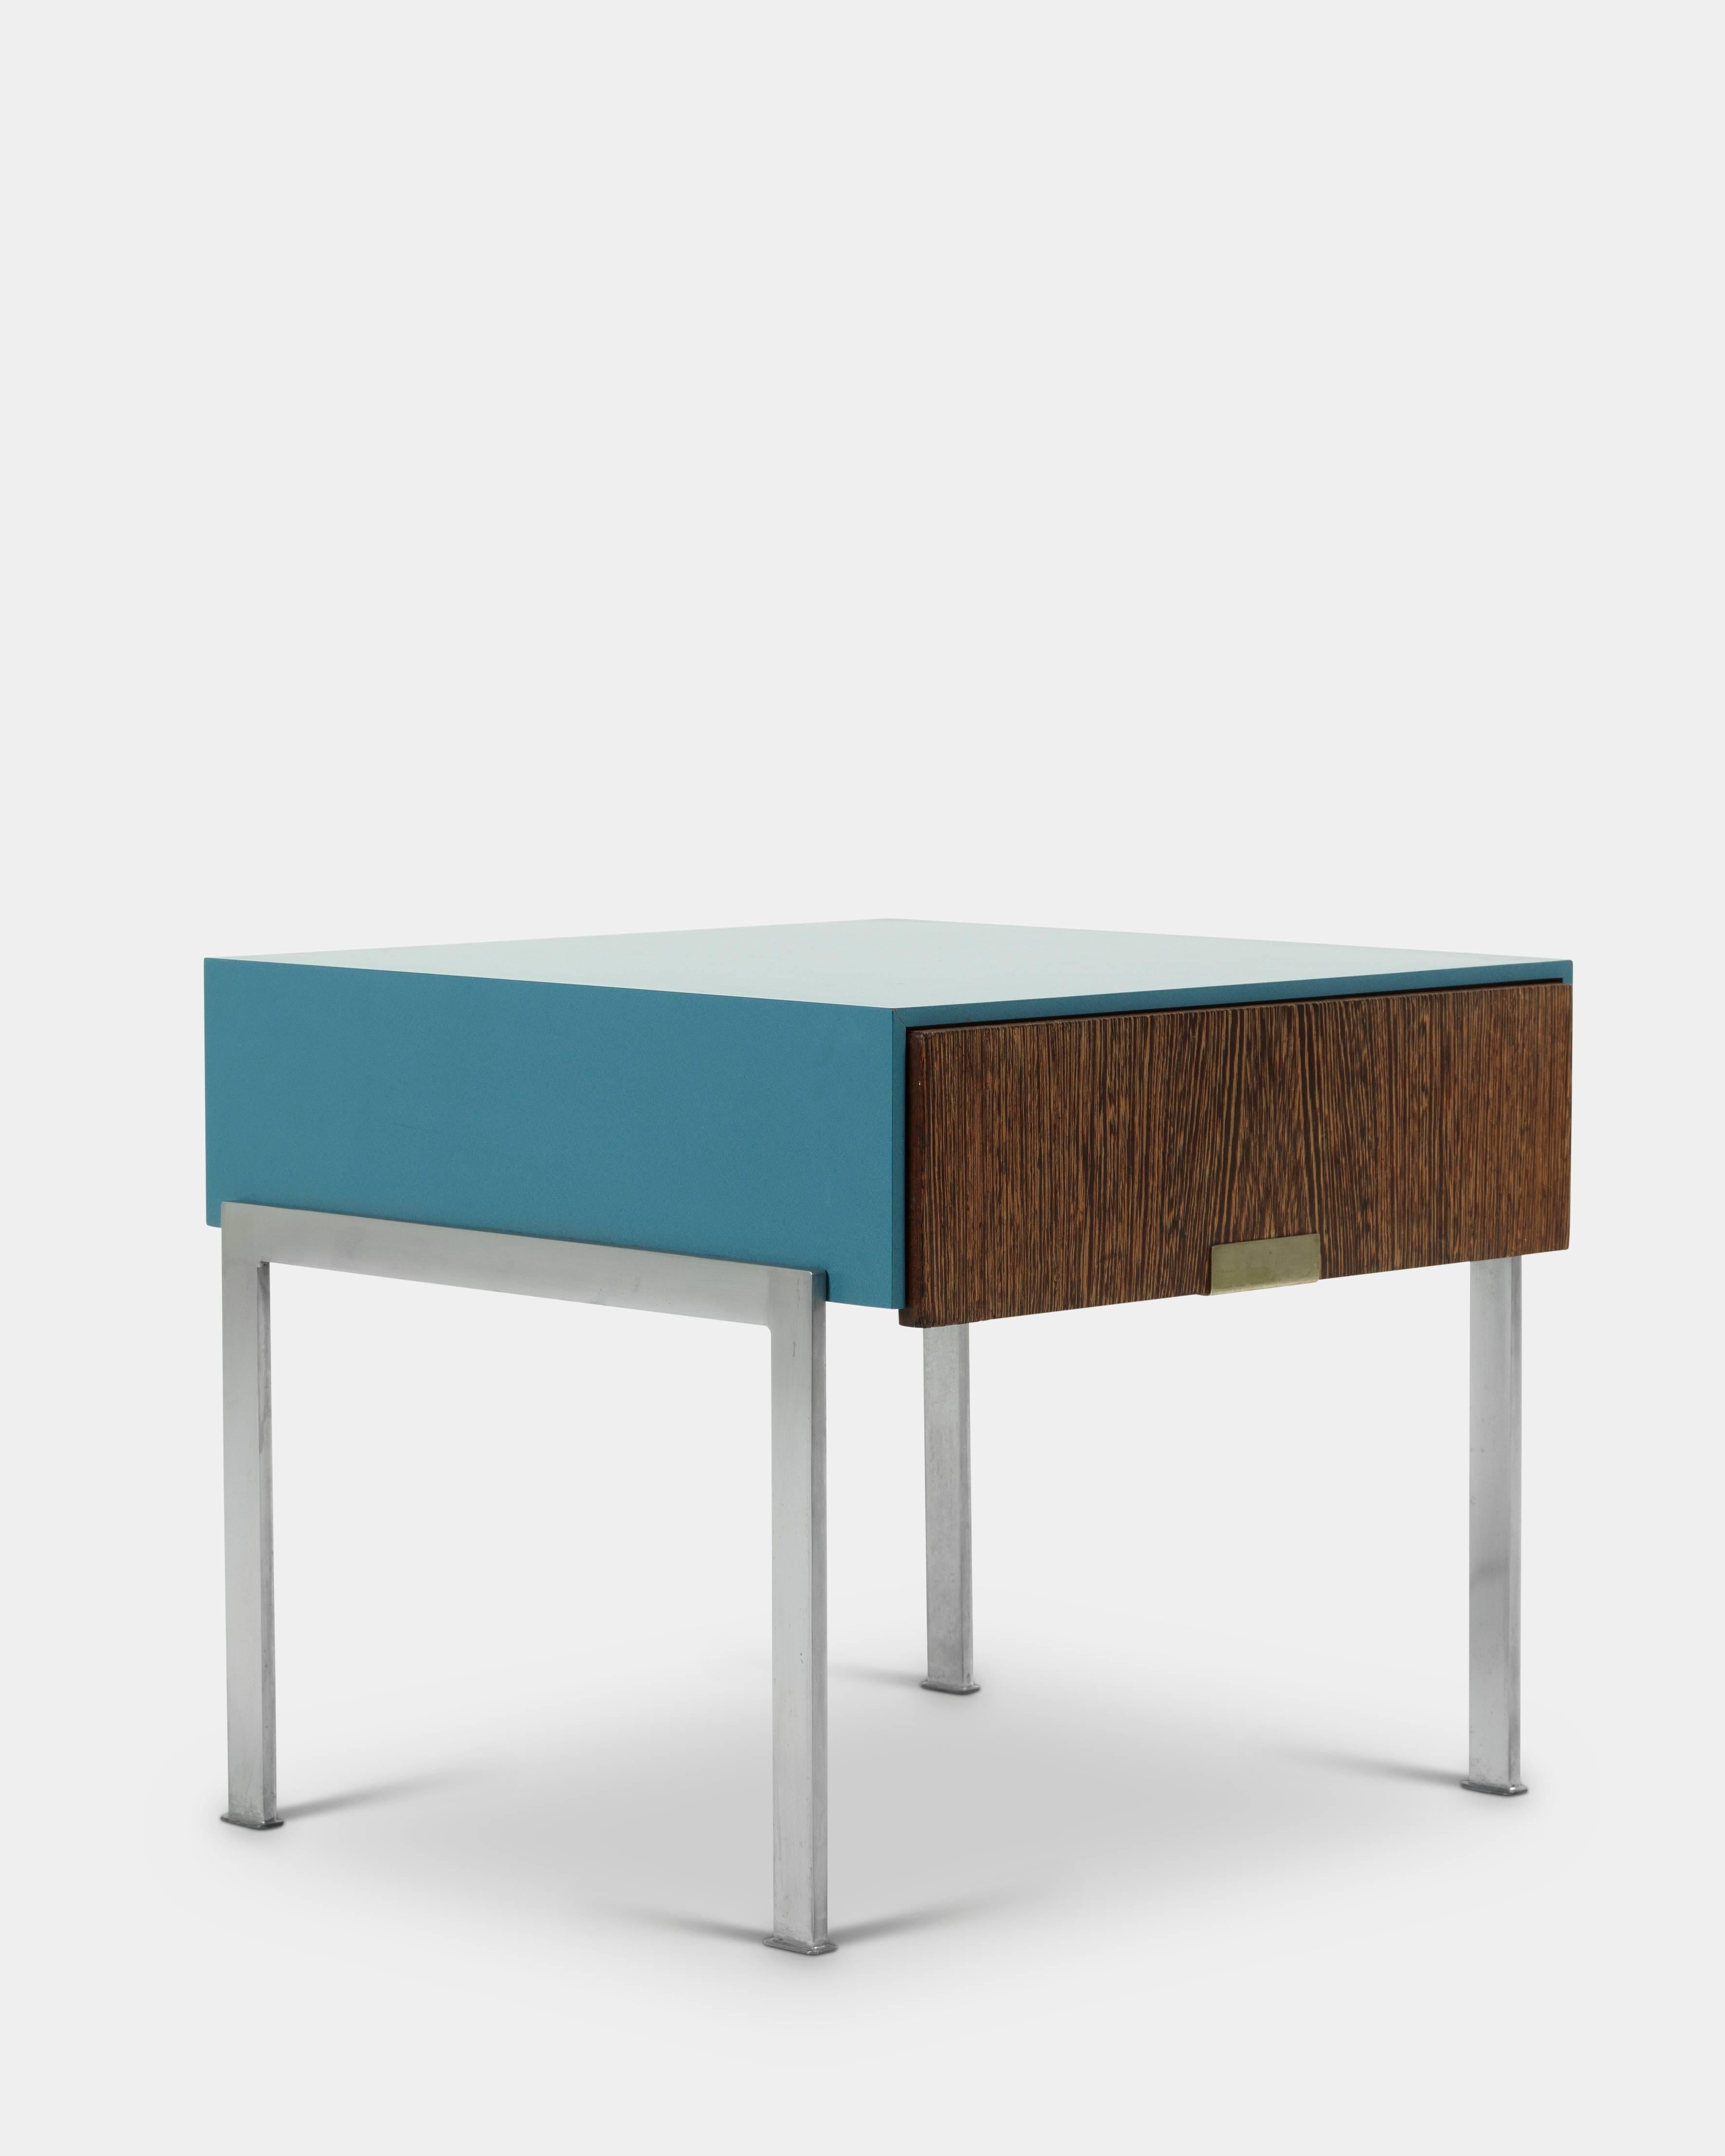 Arne Jacobsen (1902-1971):

bedside table with drawer, front and back of wengé wood, inside interior with maple veneer and sides and tabletop with blue patterned formica on a steel frame. 
Designed by Arne Jacobsen and manufactured by Fritz